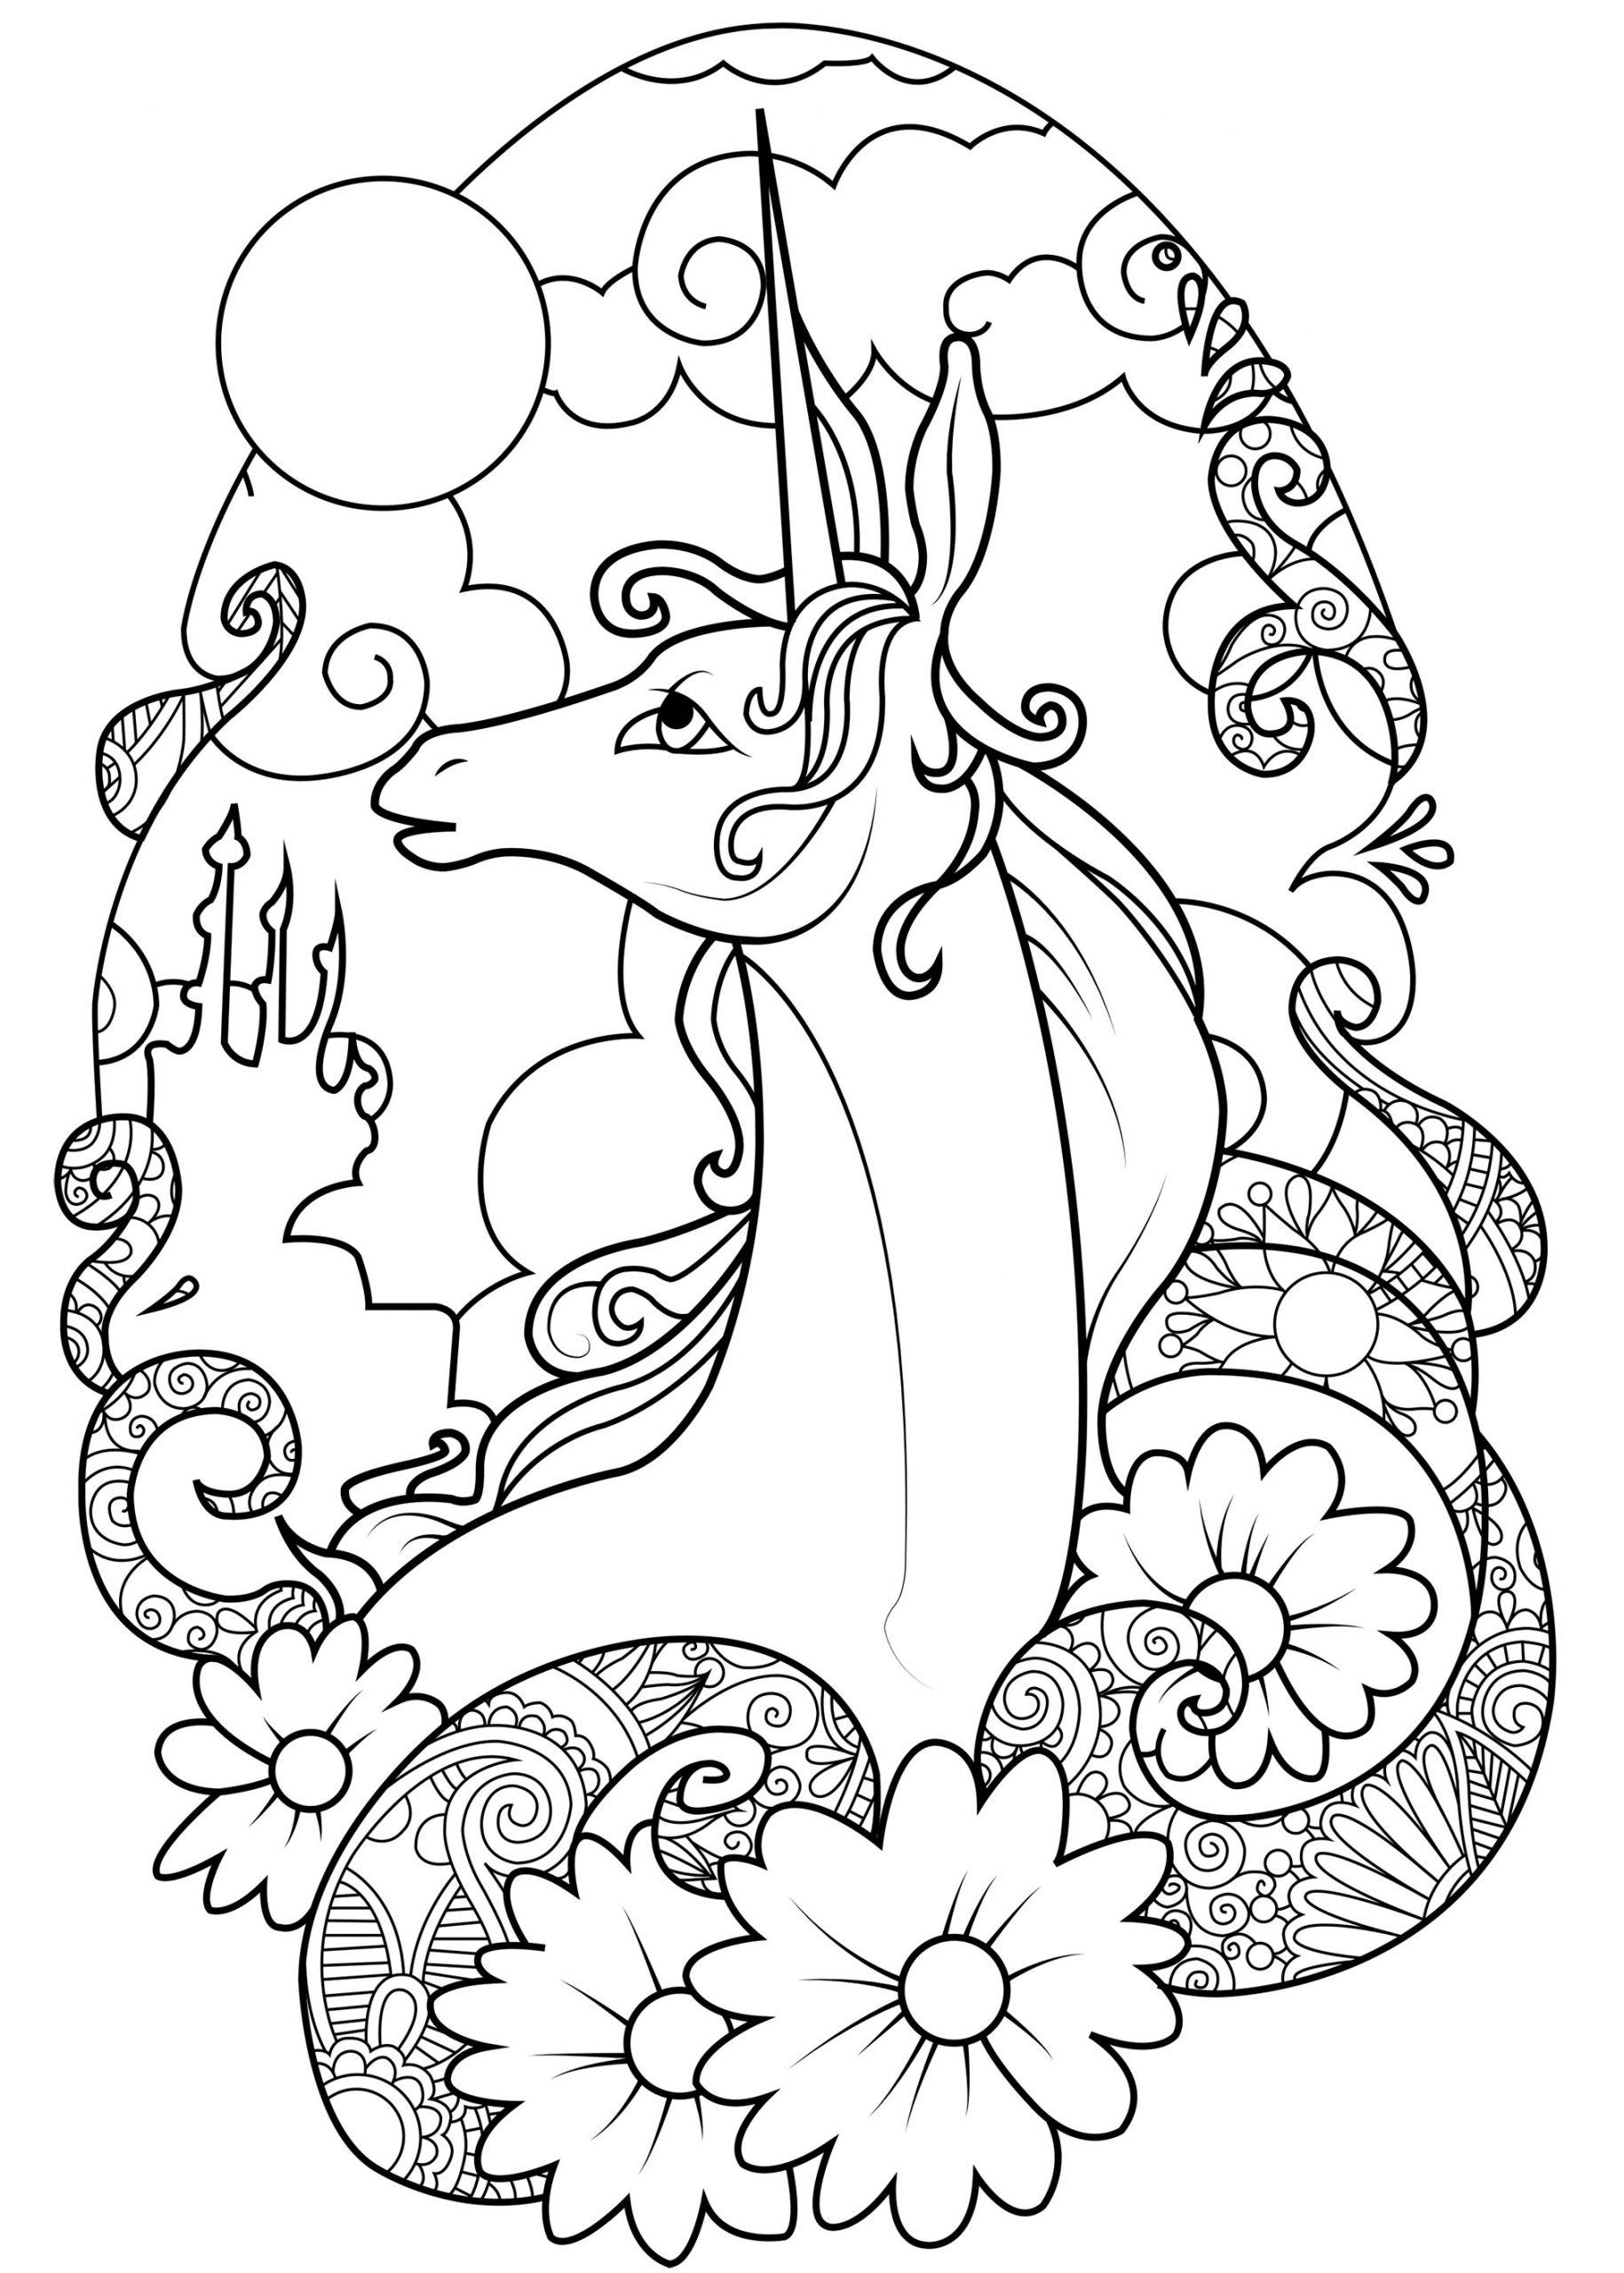 Cute Unicorns Coloring Pages - Coloring Home